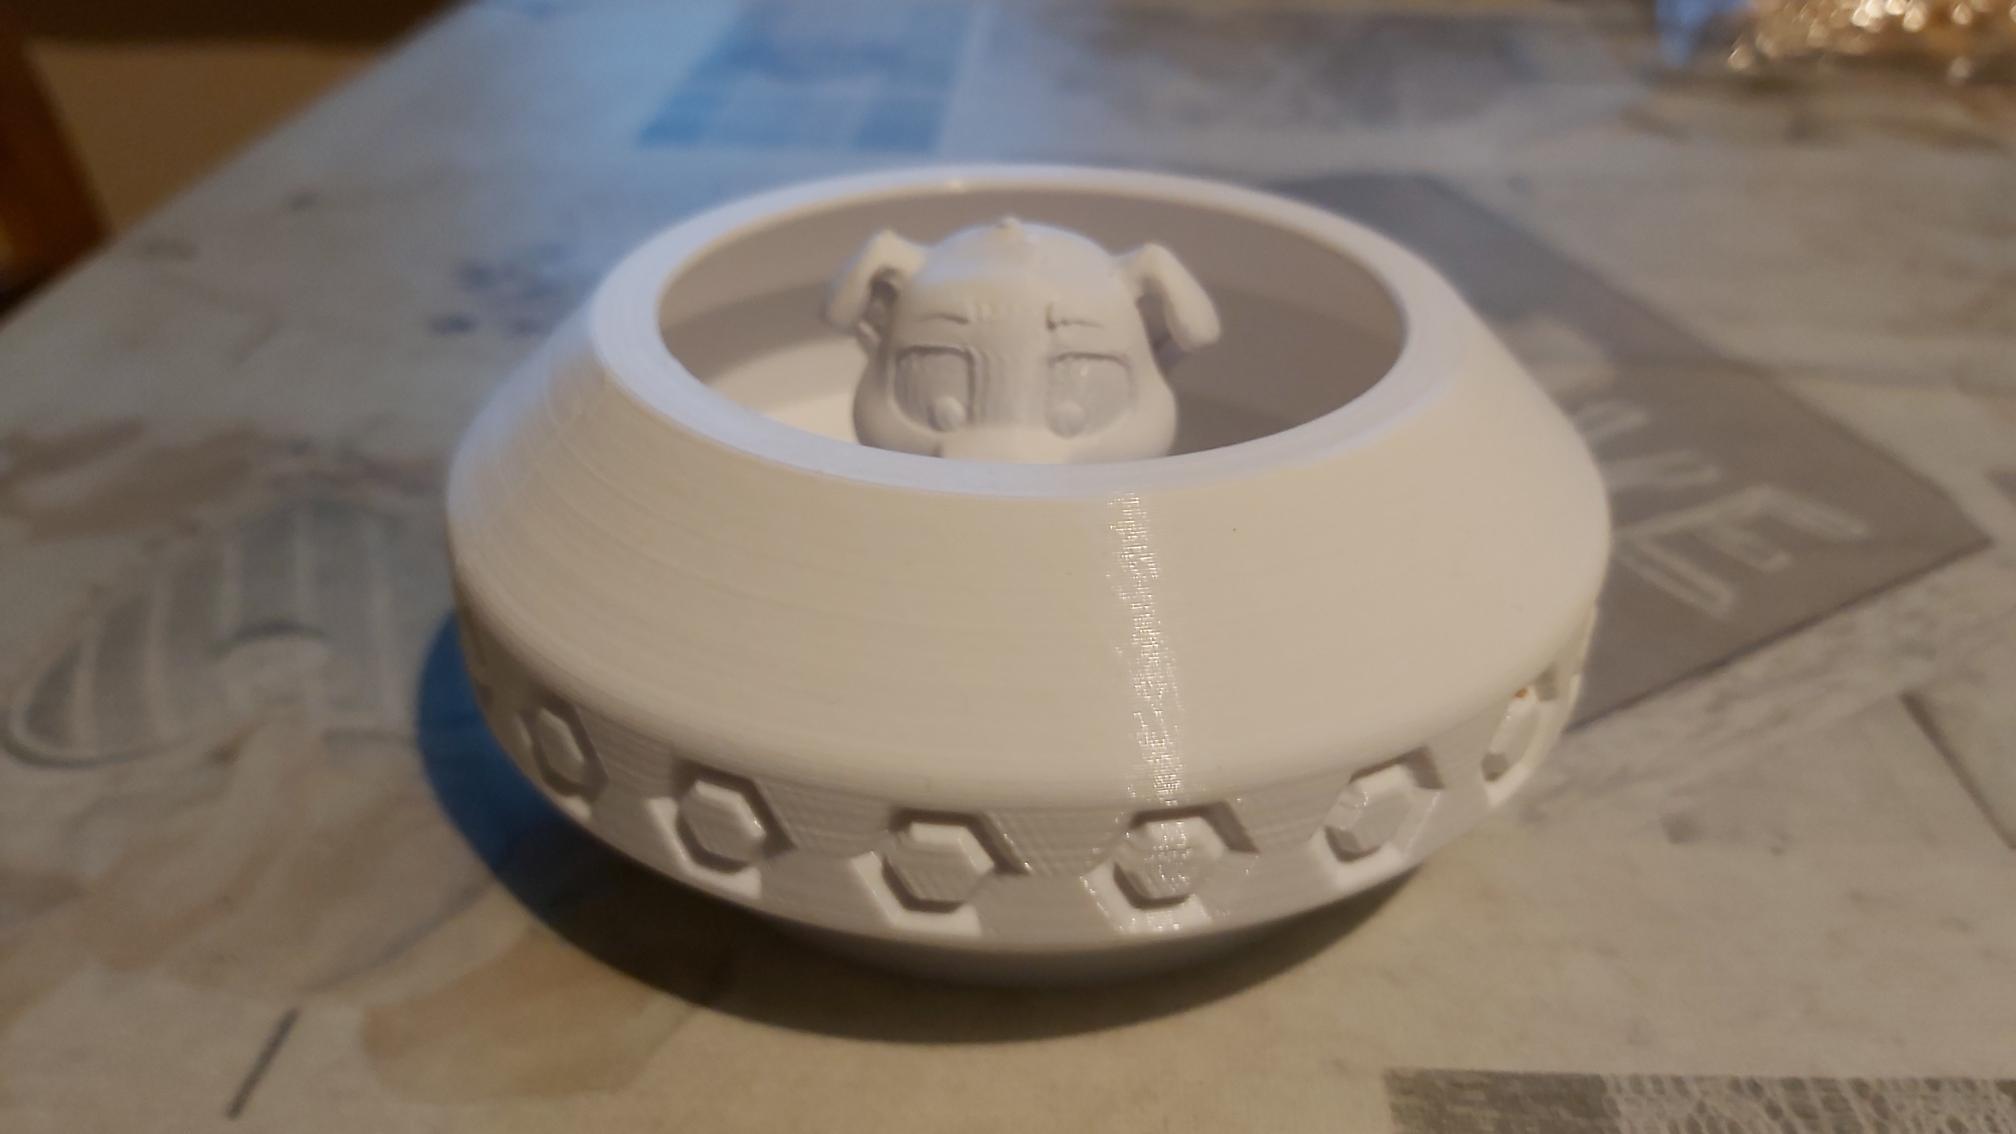 Flower pot.stl - Printed with Anet ET5X. Prima creator Easyprint white 1,75 mm filament. - 3d model